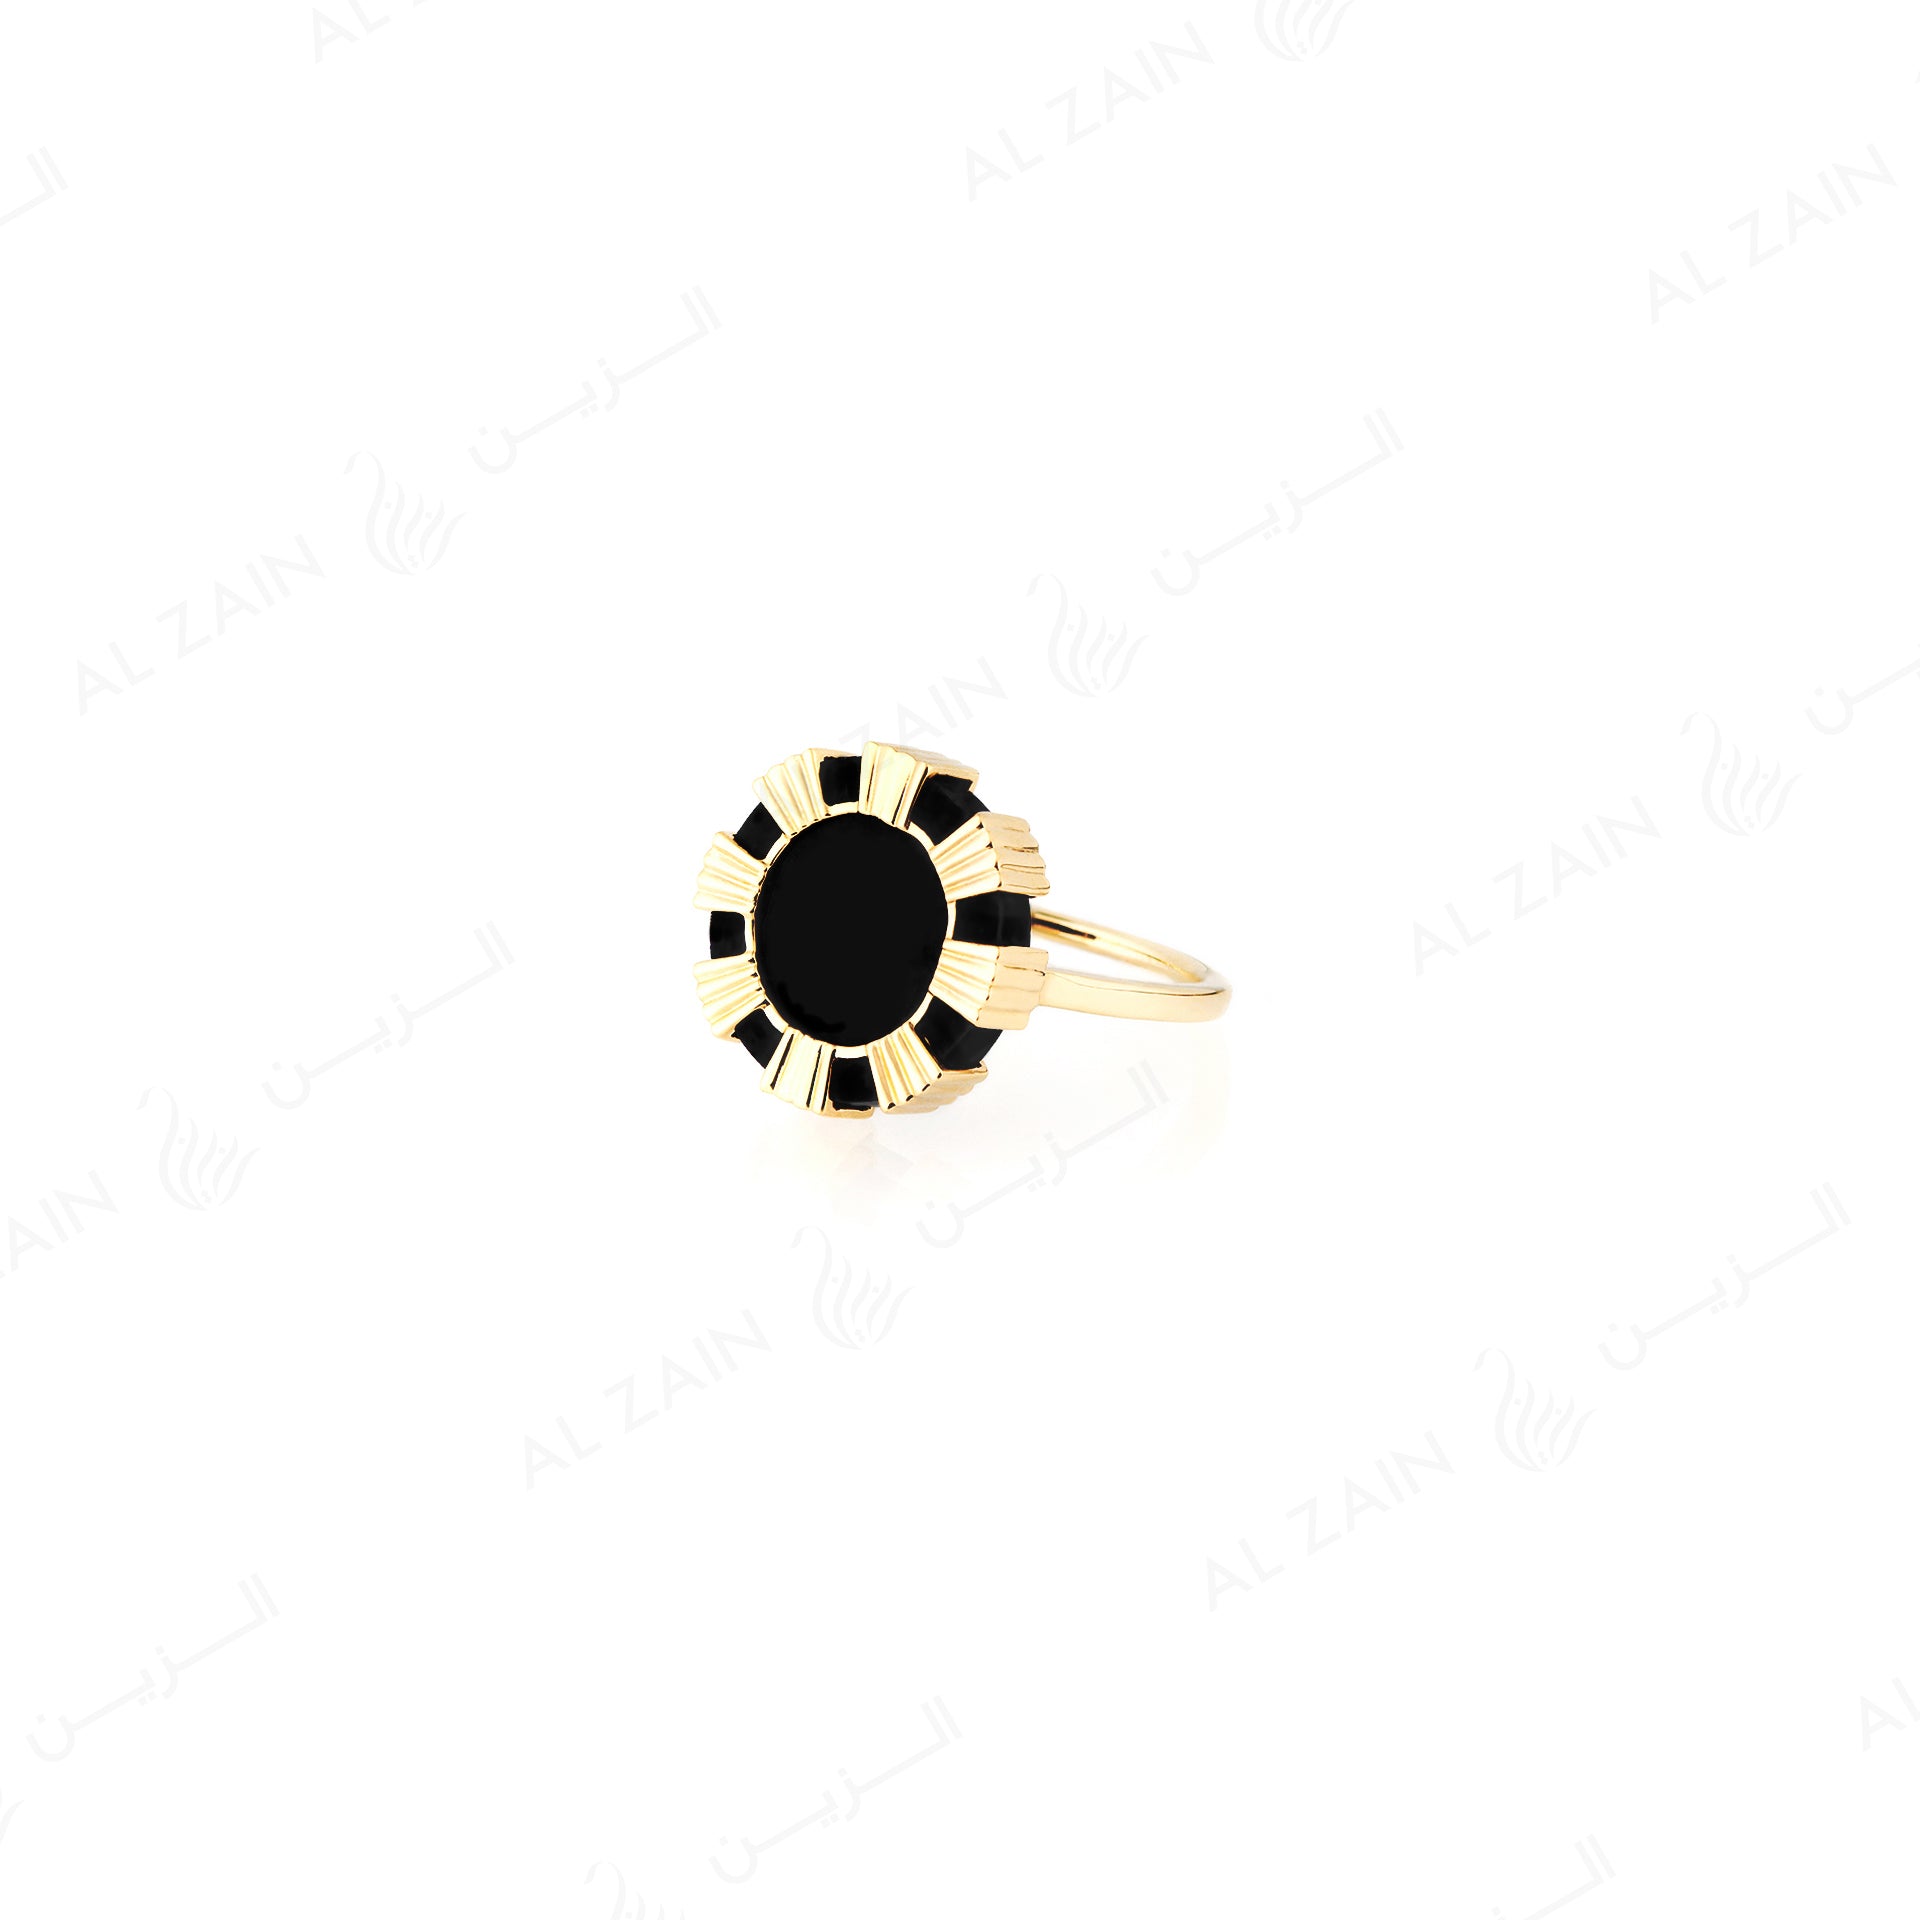 Cordoba ring in yellow gold with onyx stone